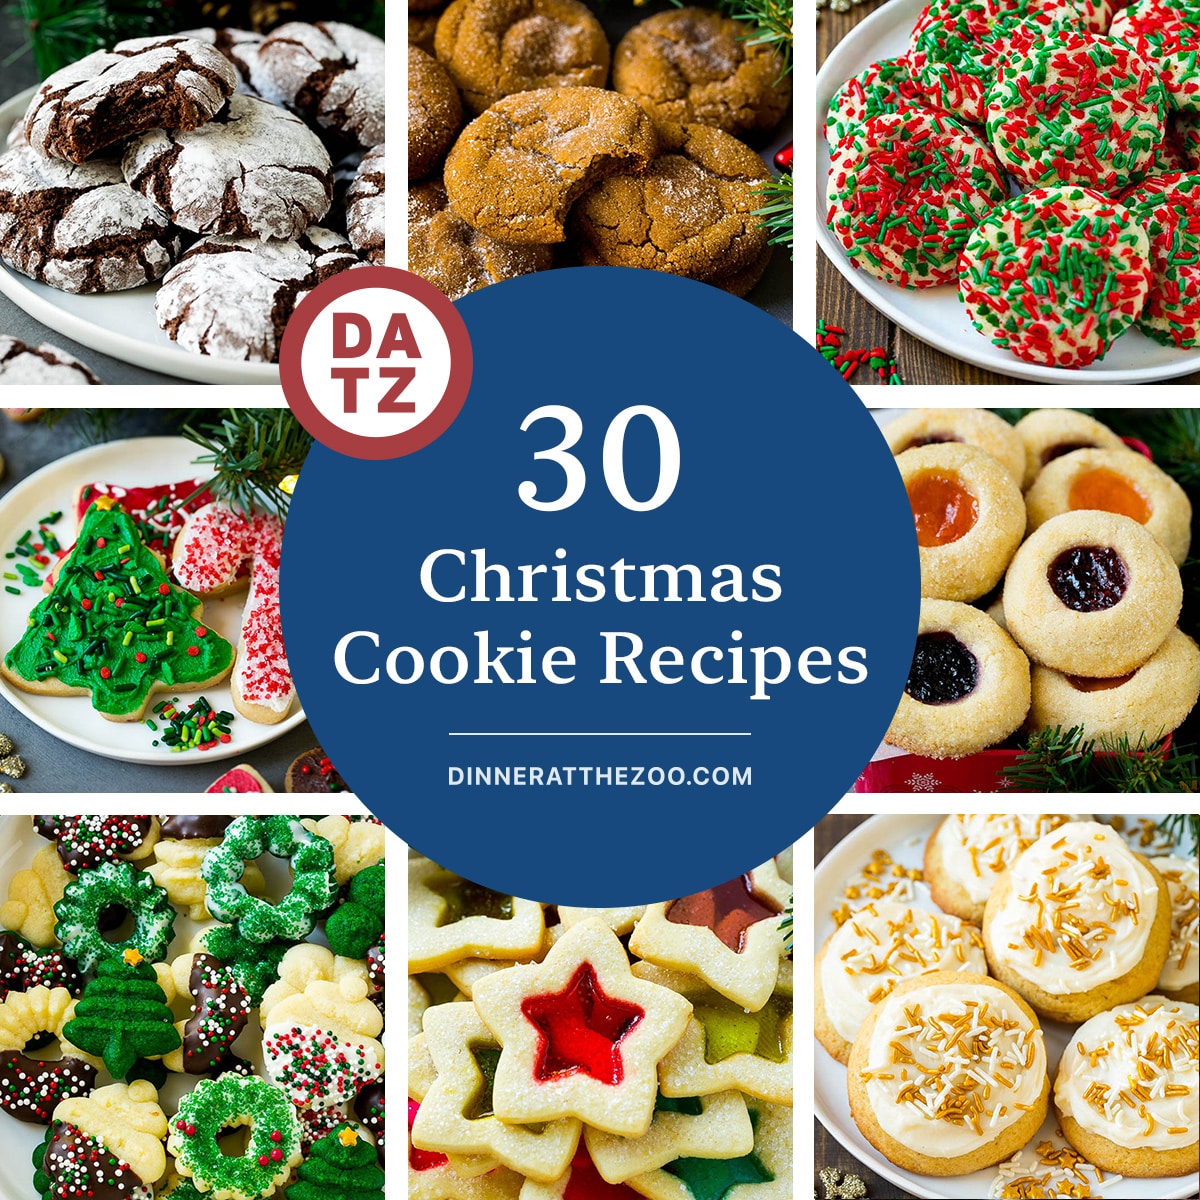 A collection of festive Christmas cookie recipes including spritz cookies, thumbprint cookies and eggnog cookies. 